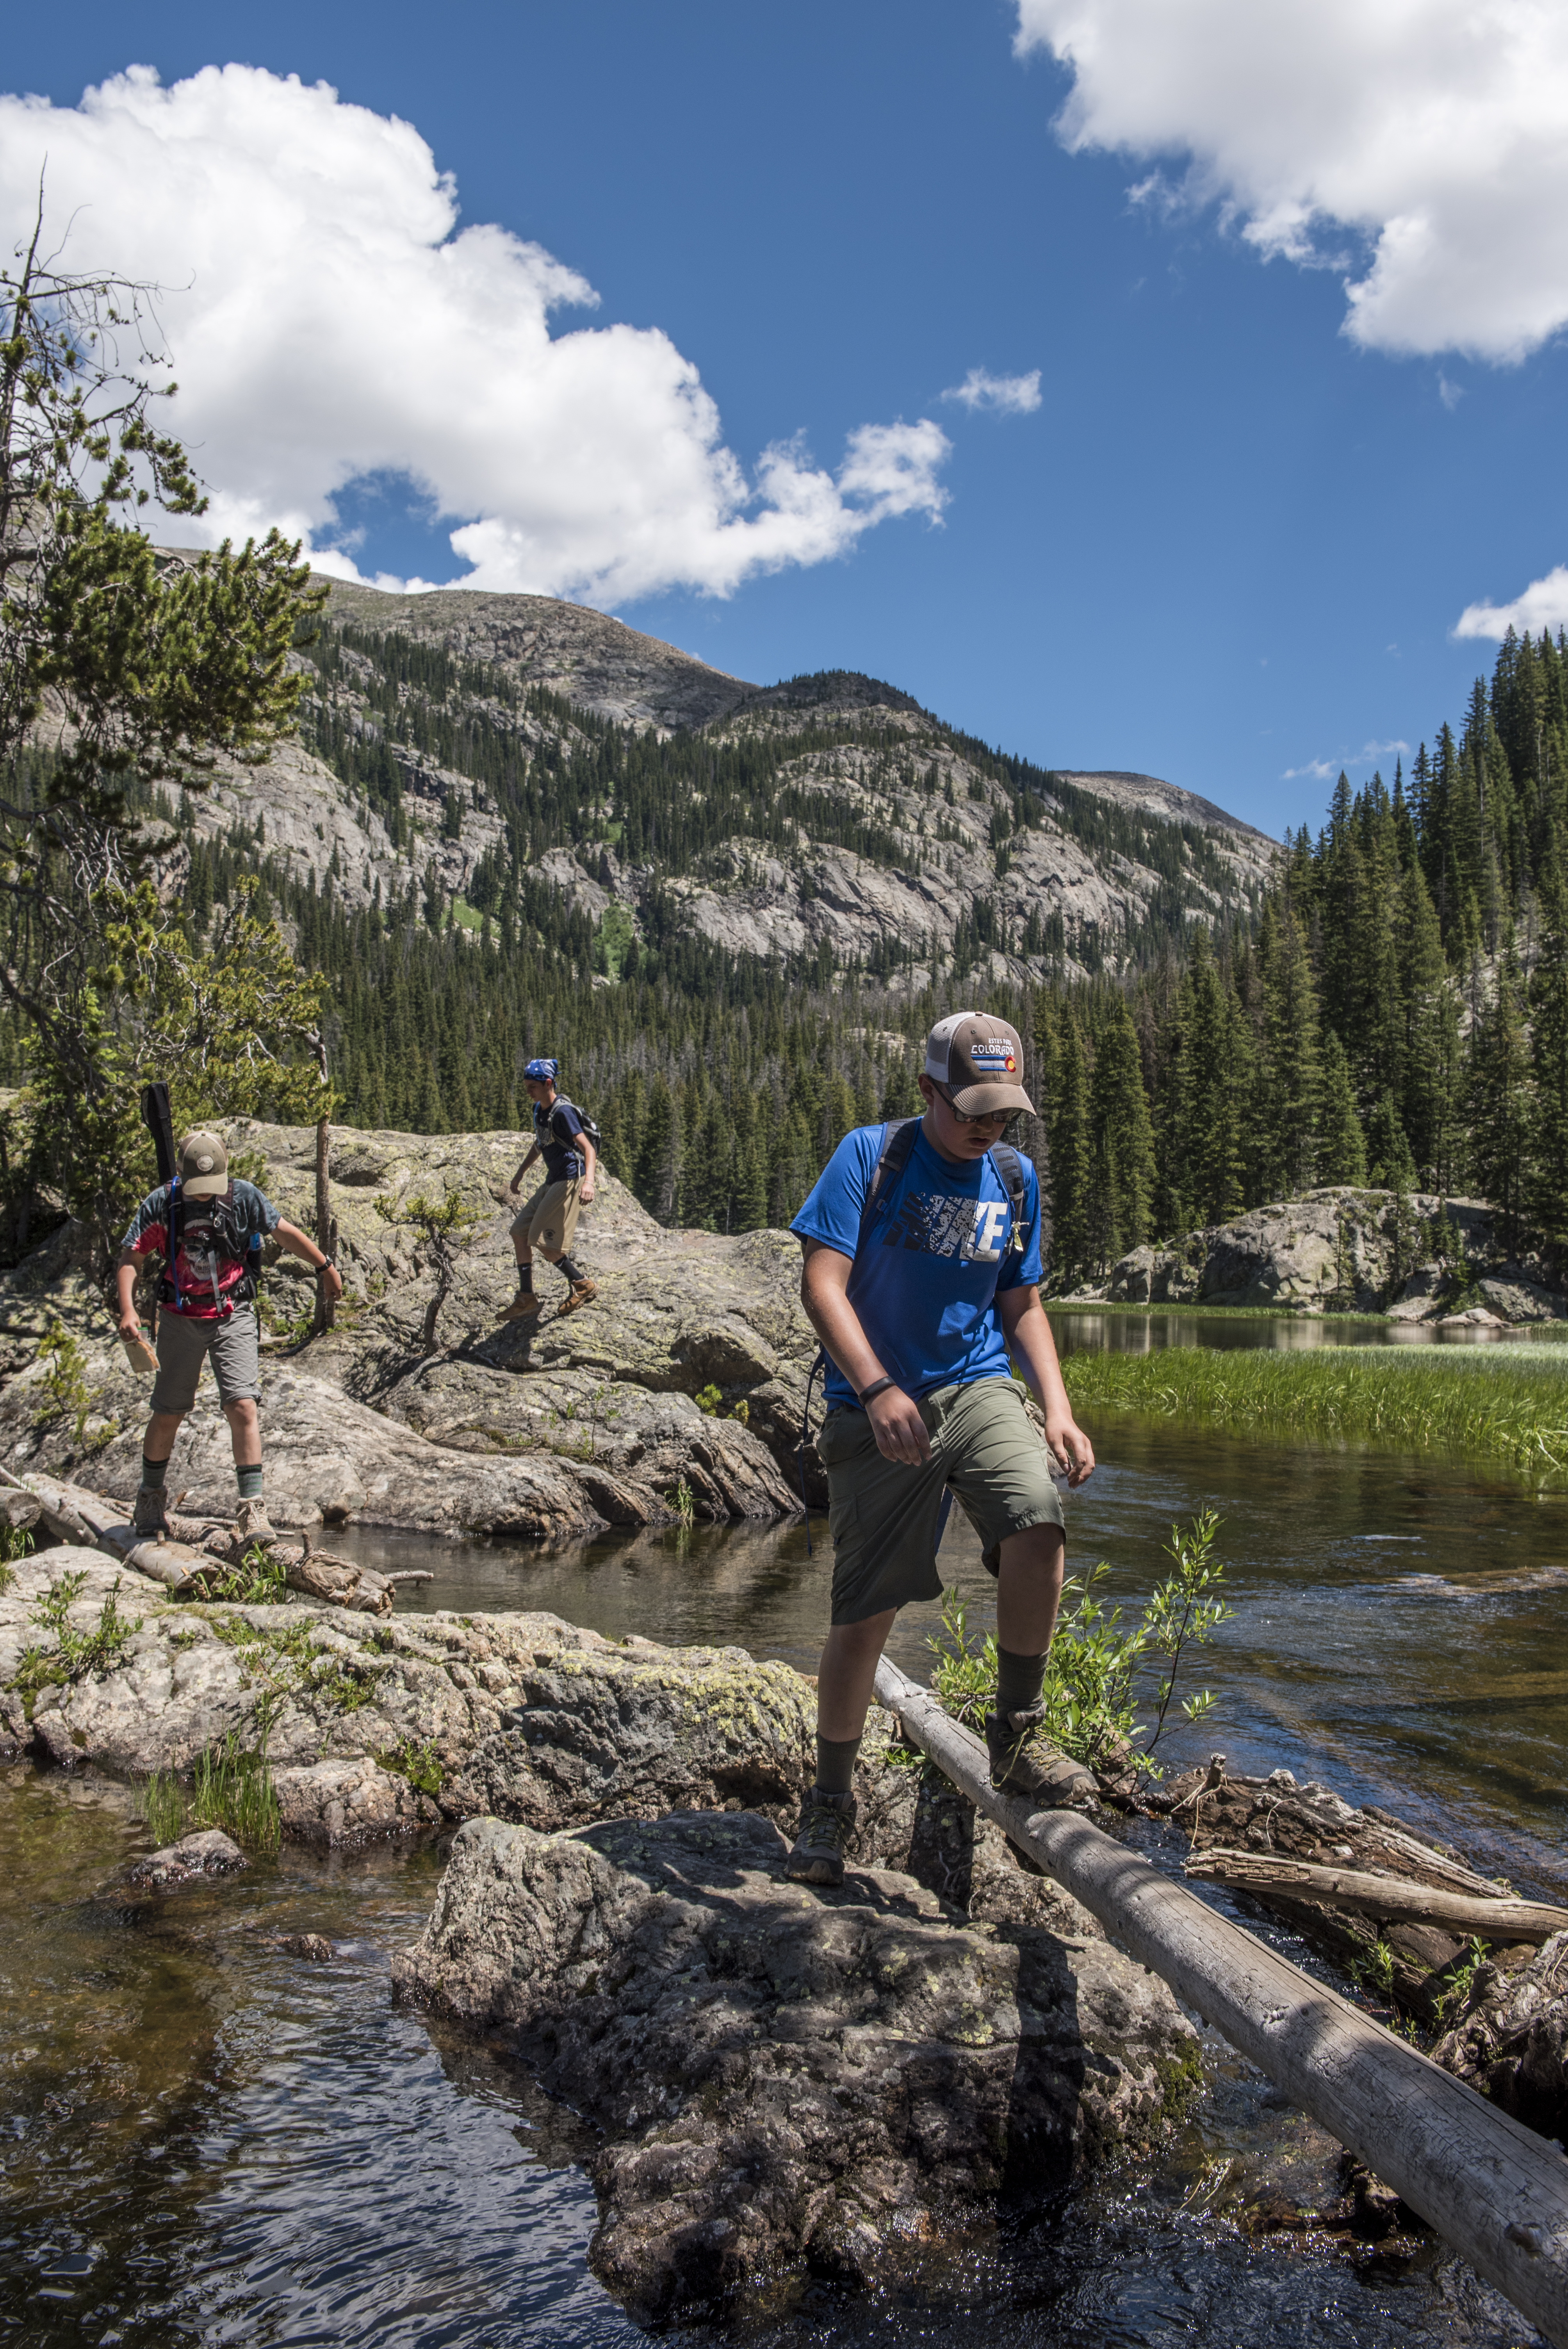 Scouts from PA explore Lone Pine Lake in Rocky Mountain National Park, during a two week adventure trip to Colorado